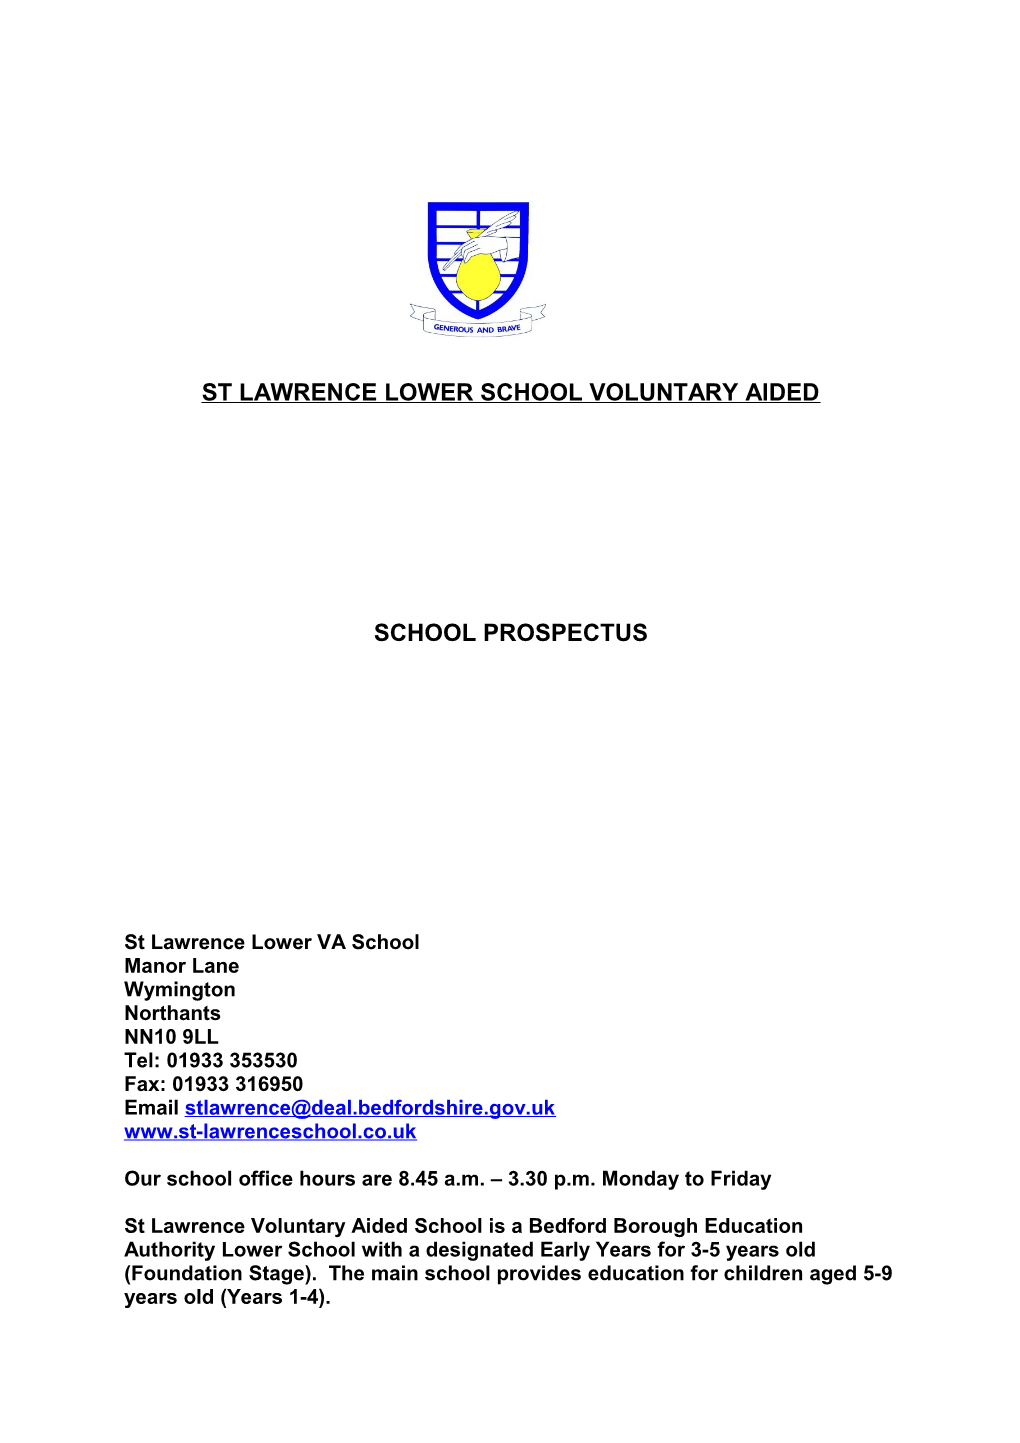 St Lawrence Lower School Voluntary Aided